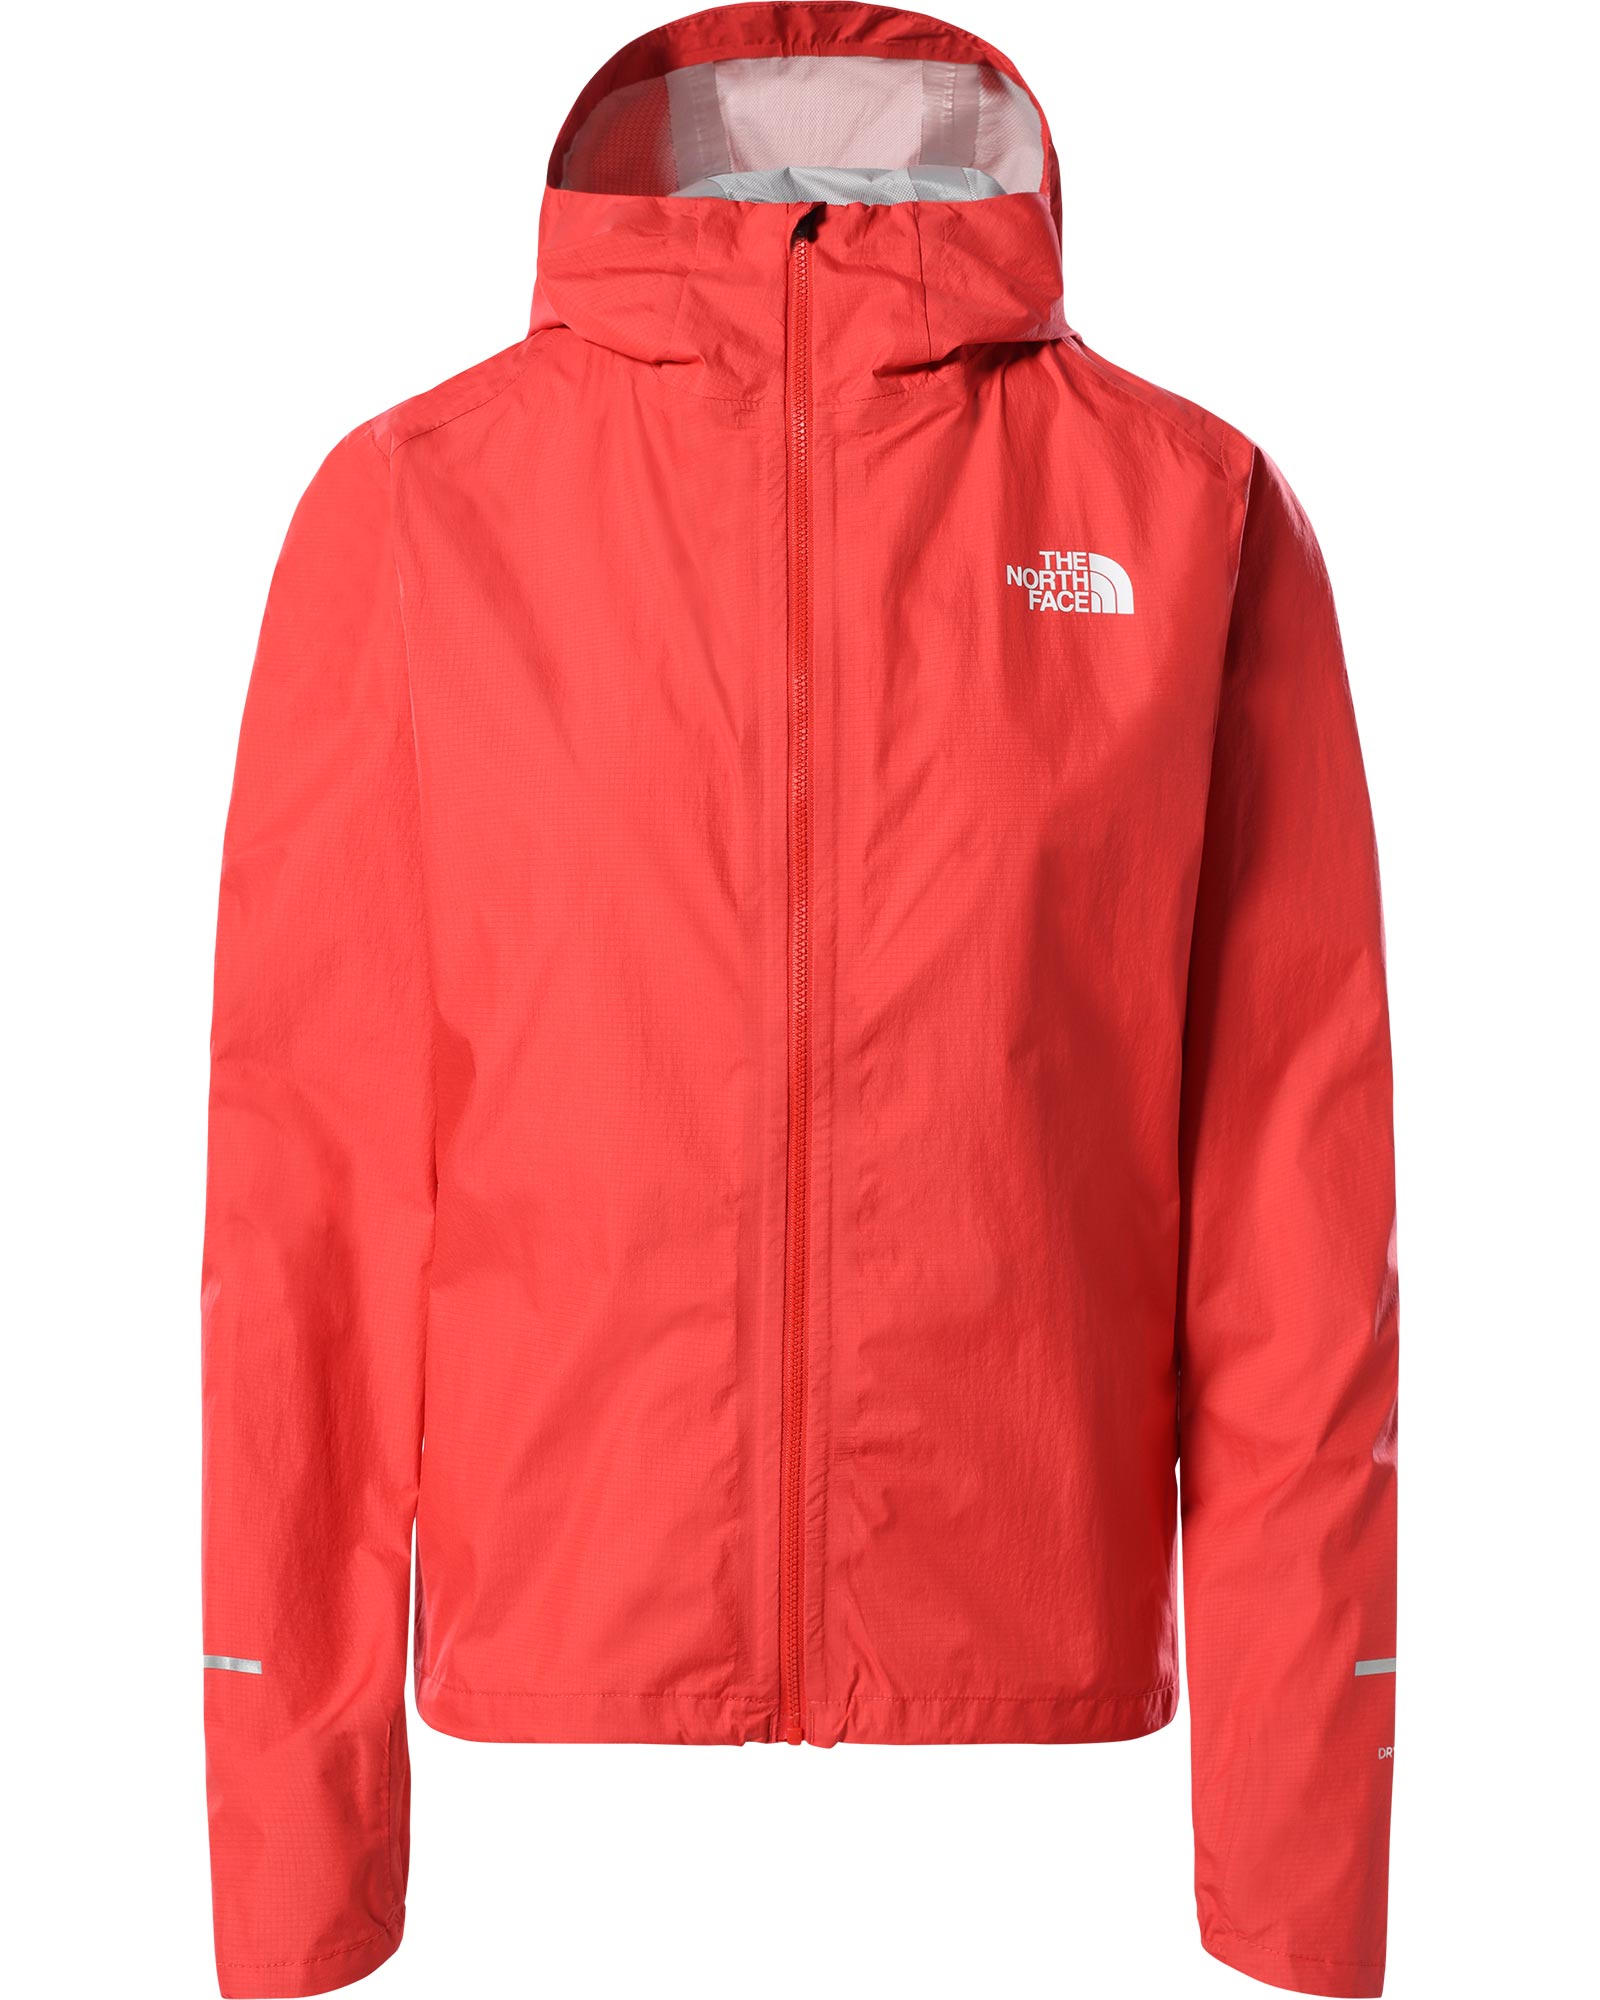 The North Face First Dawn Packable Women’s Jacket - Horizon Red XS